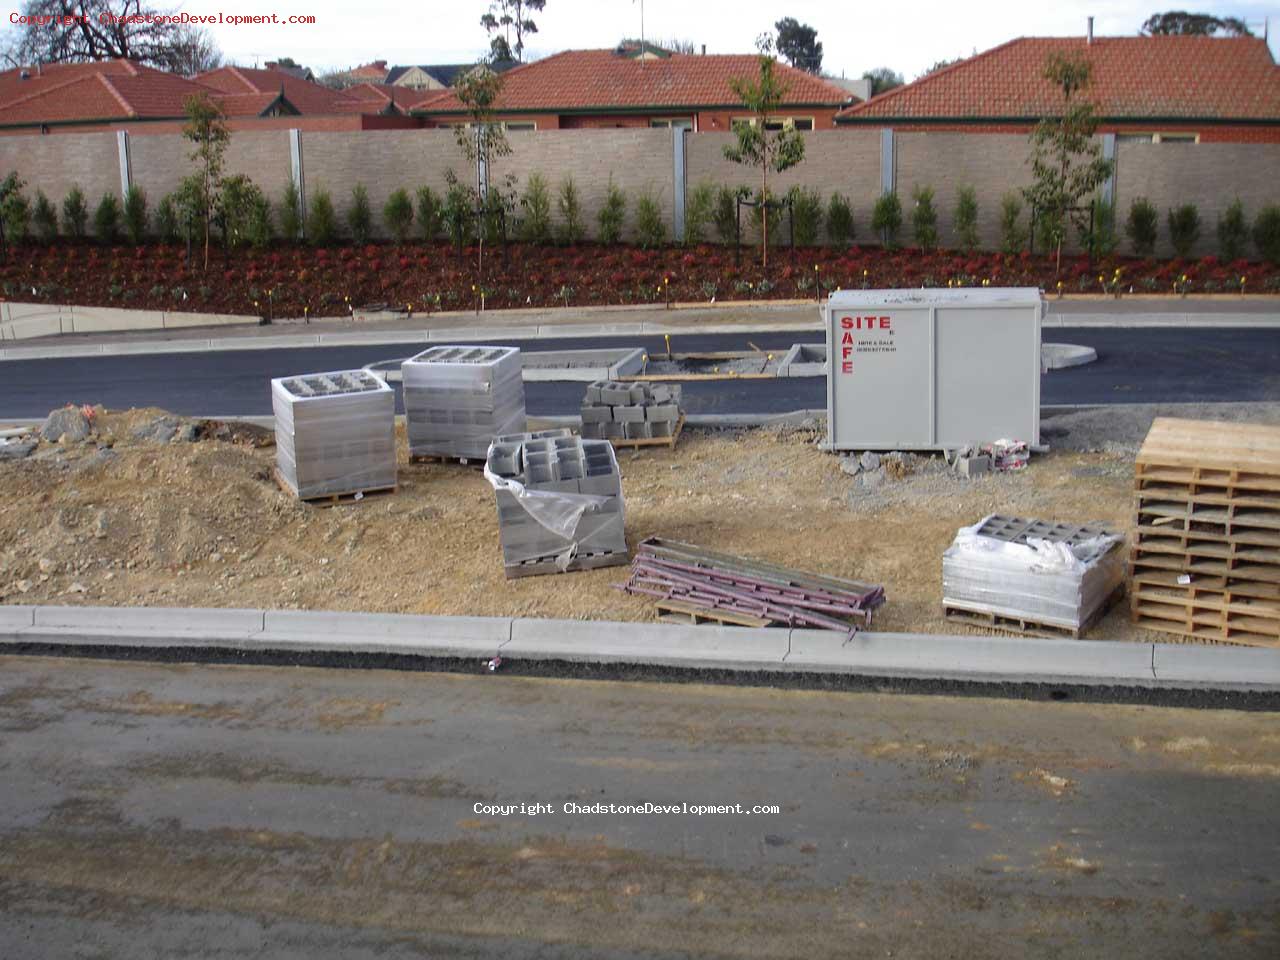 a Site Safe and bricks on the Capon St ramp - Chadstone Development Discussions